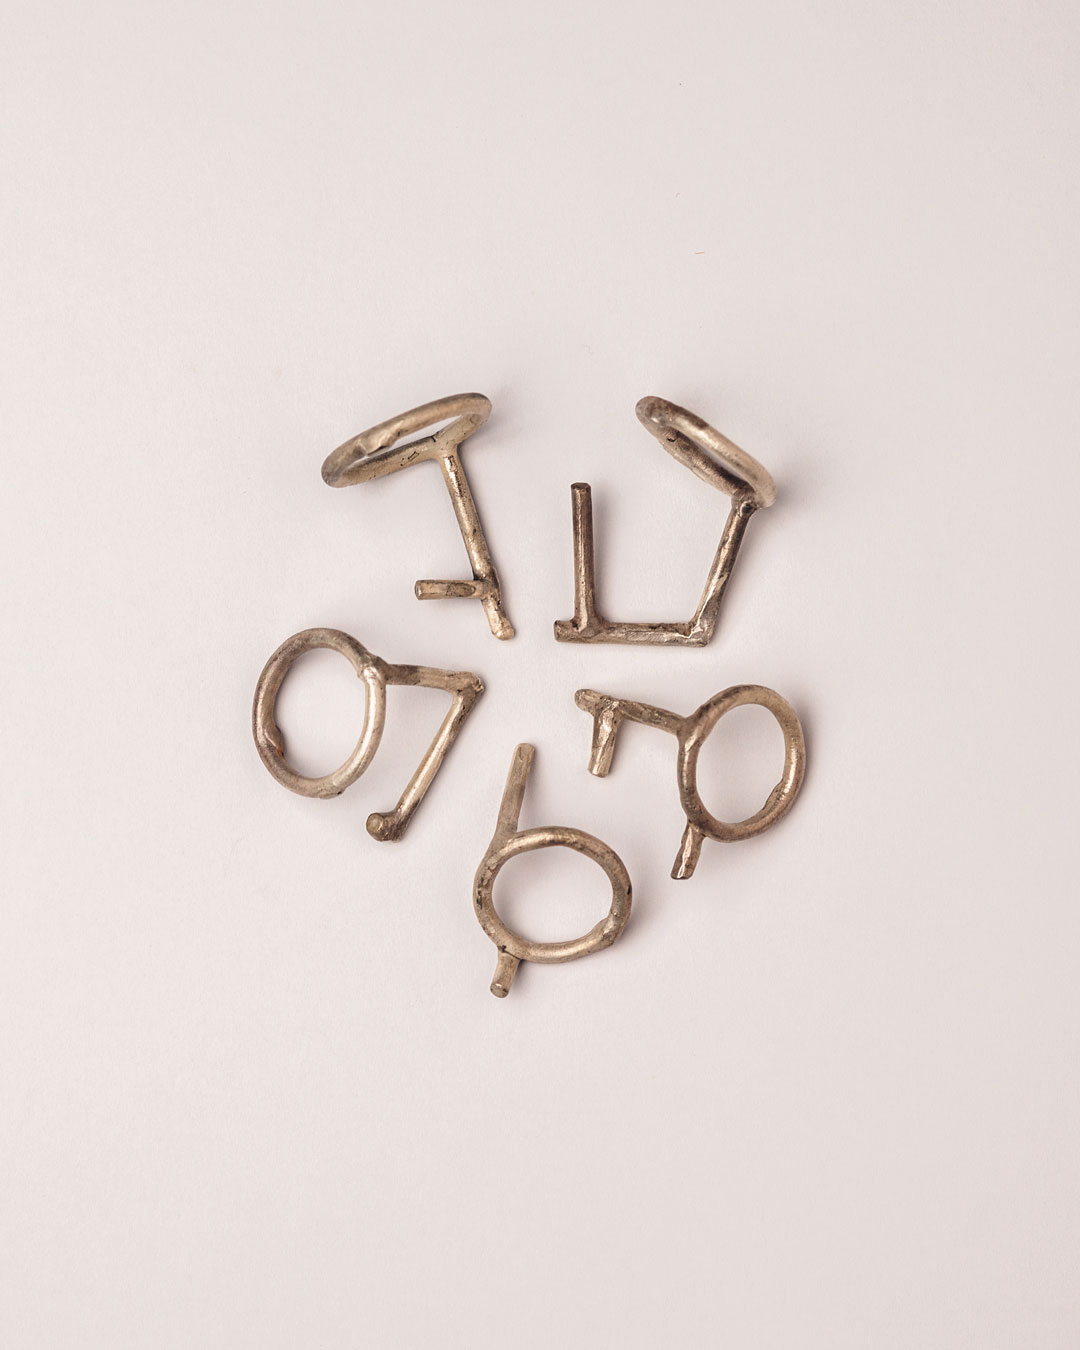 Antje Bräuer, untitled, 2018, rings; silver, 34 x 26 x 26 mm, €250 each